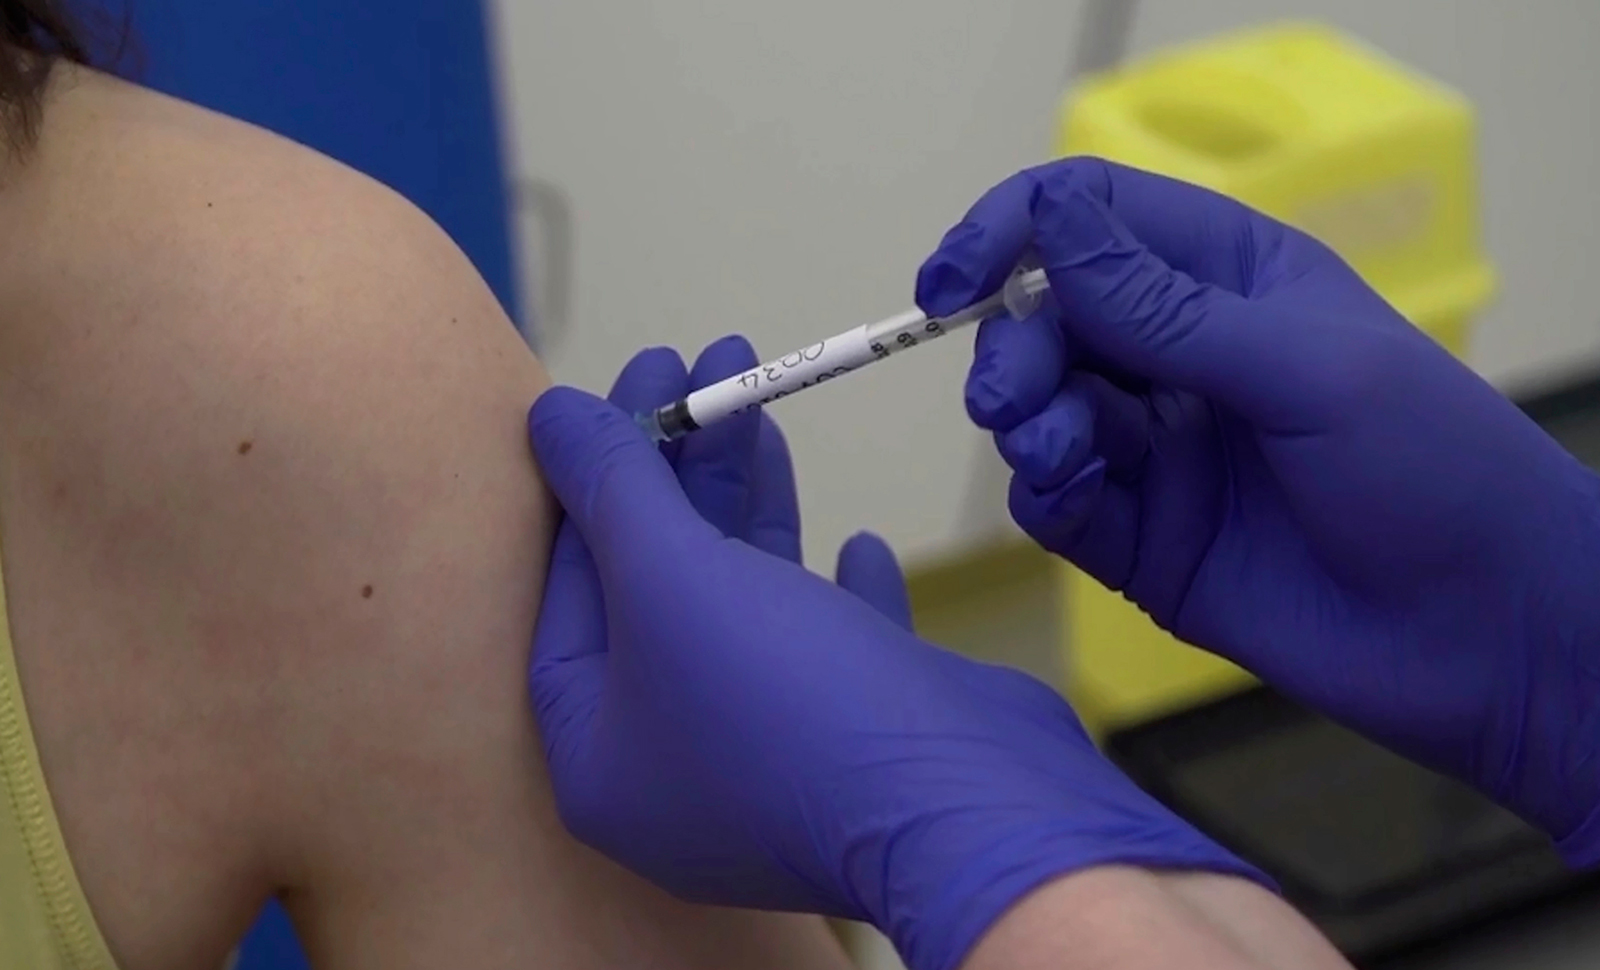 A volunteer is injected with a potential coronavirus vaccine as part of the first human trials by Oxford University, England, on April 23.